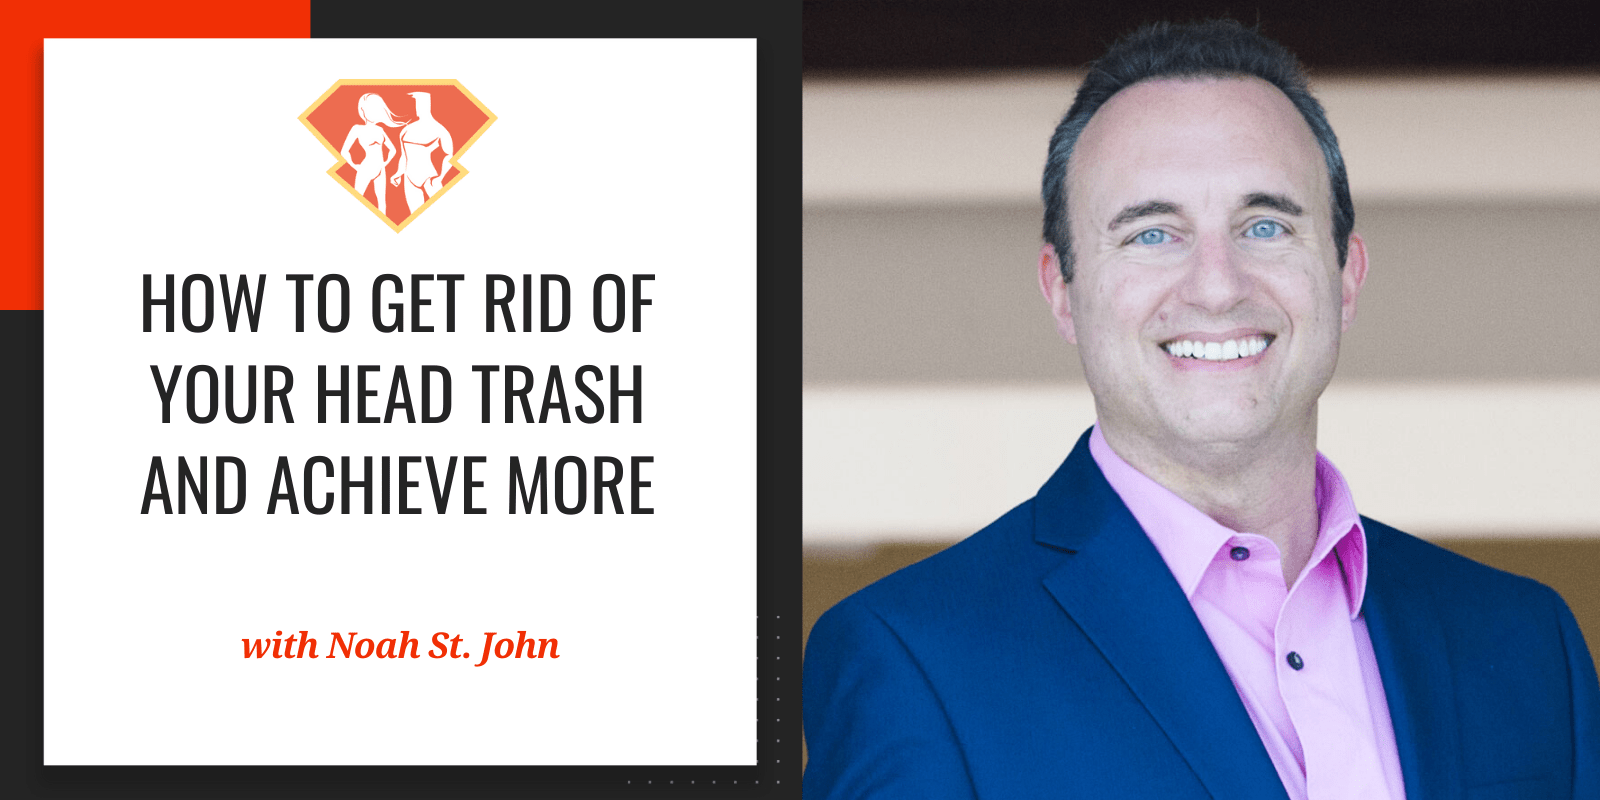 Noah St. John On How To Get Rid Of Your Head Trash And Achieve More